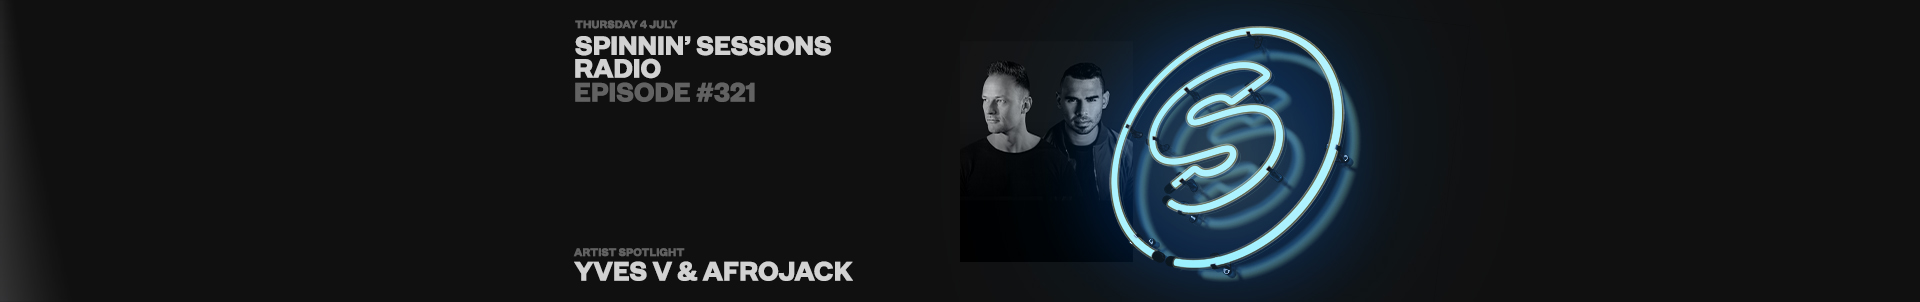 Listen to Spinnin' Sessions radio show #321 featuring Yves V & Afrojack